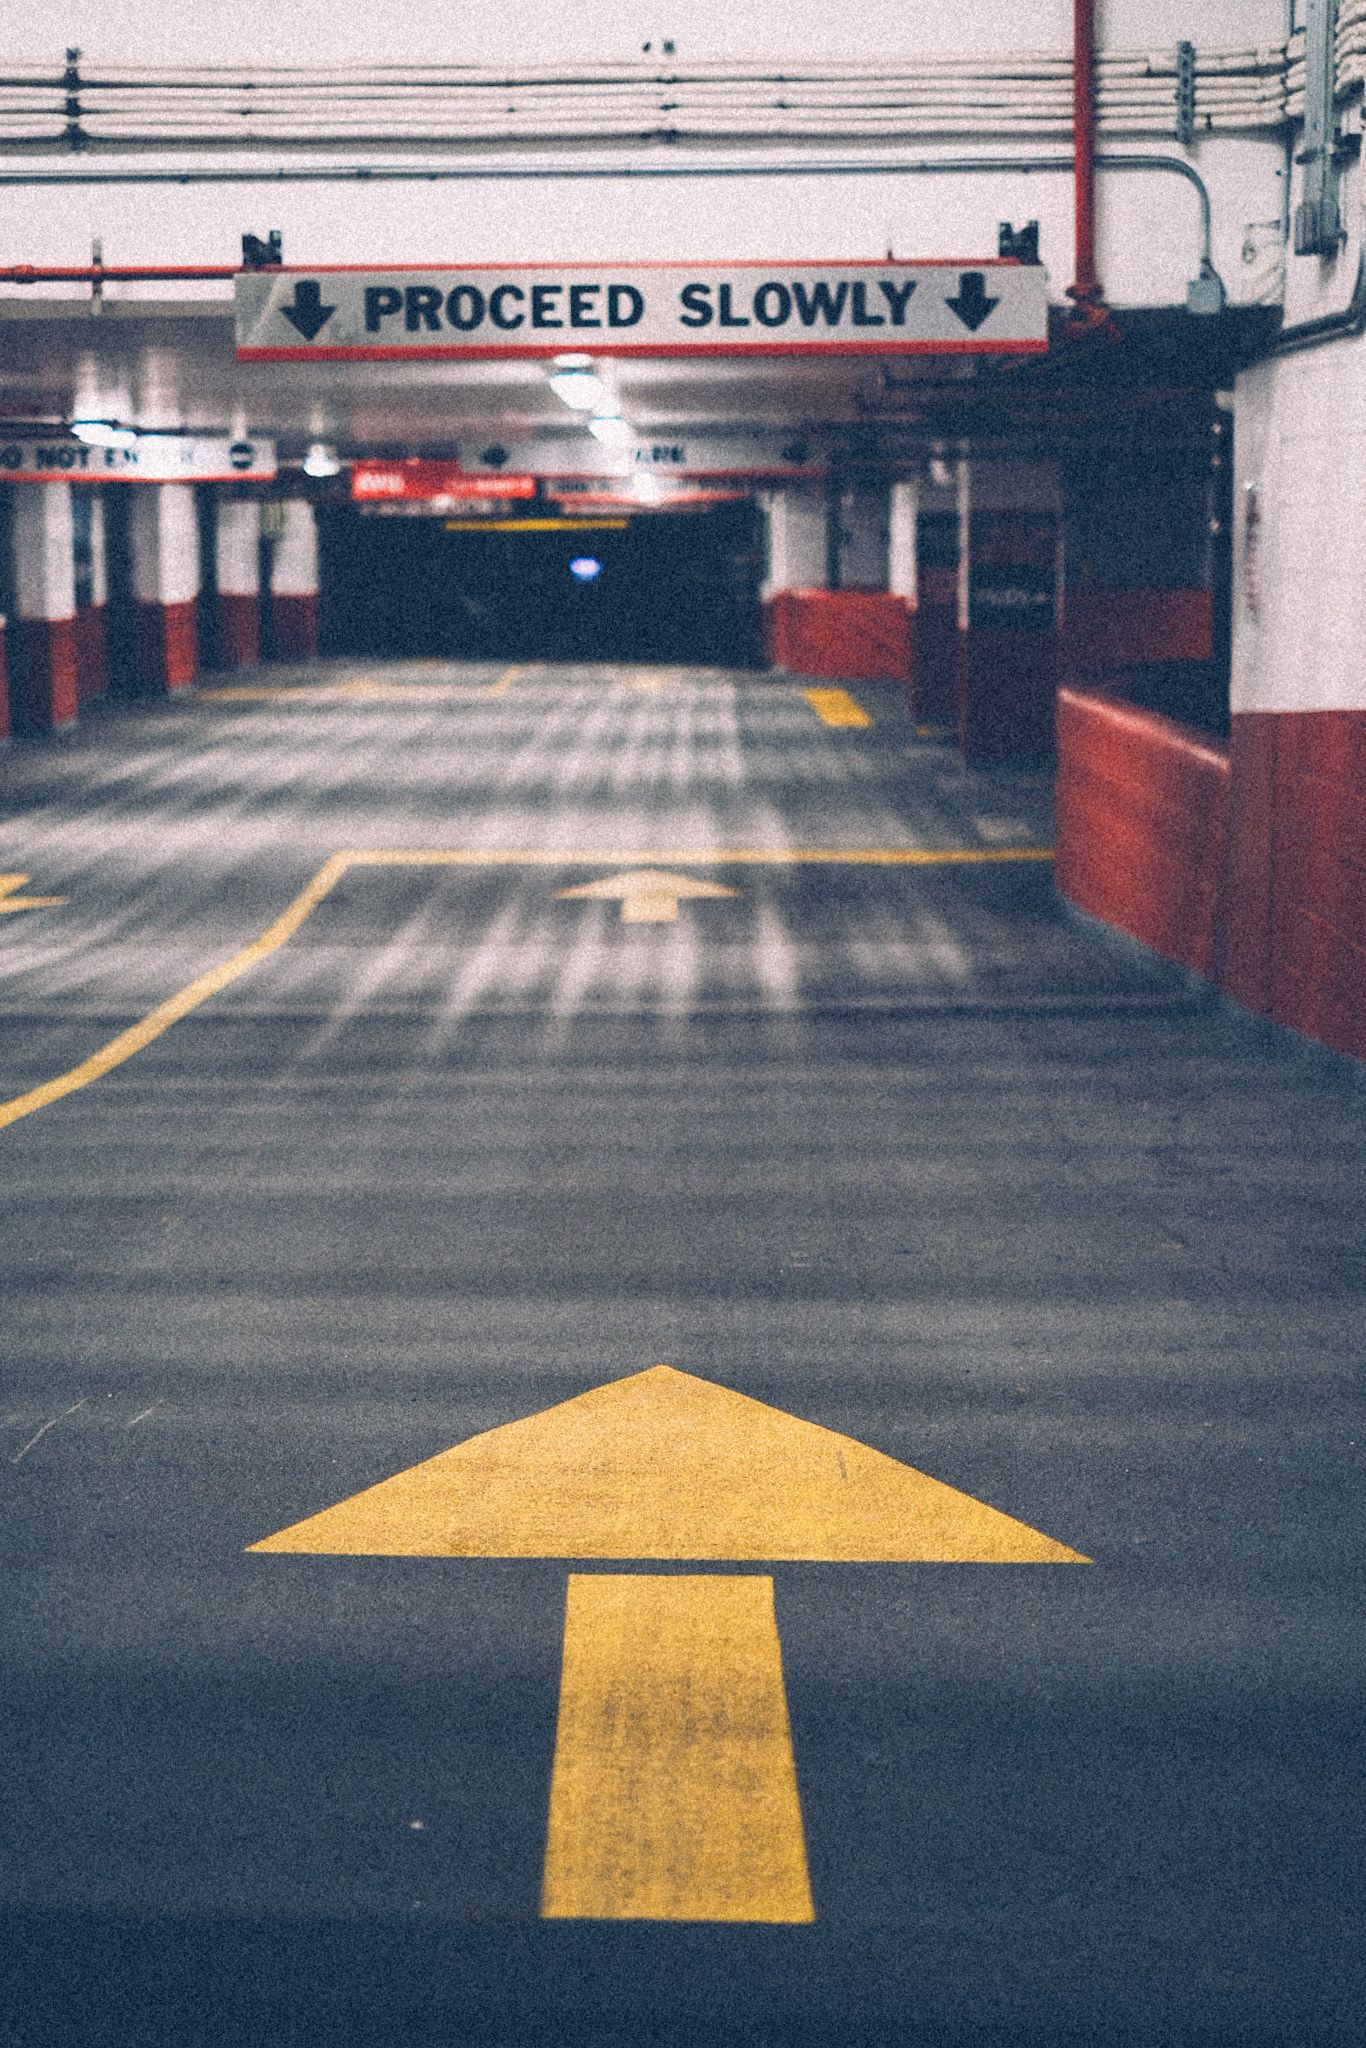 A large yellow arrow painted onto a parking garage floor points inside, continuing into white and red walls and gray cement and eventually into the distant dark. A sign above says “Proceed slowly.”